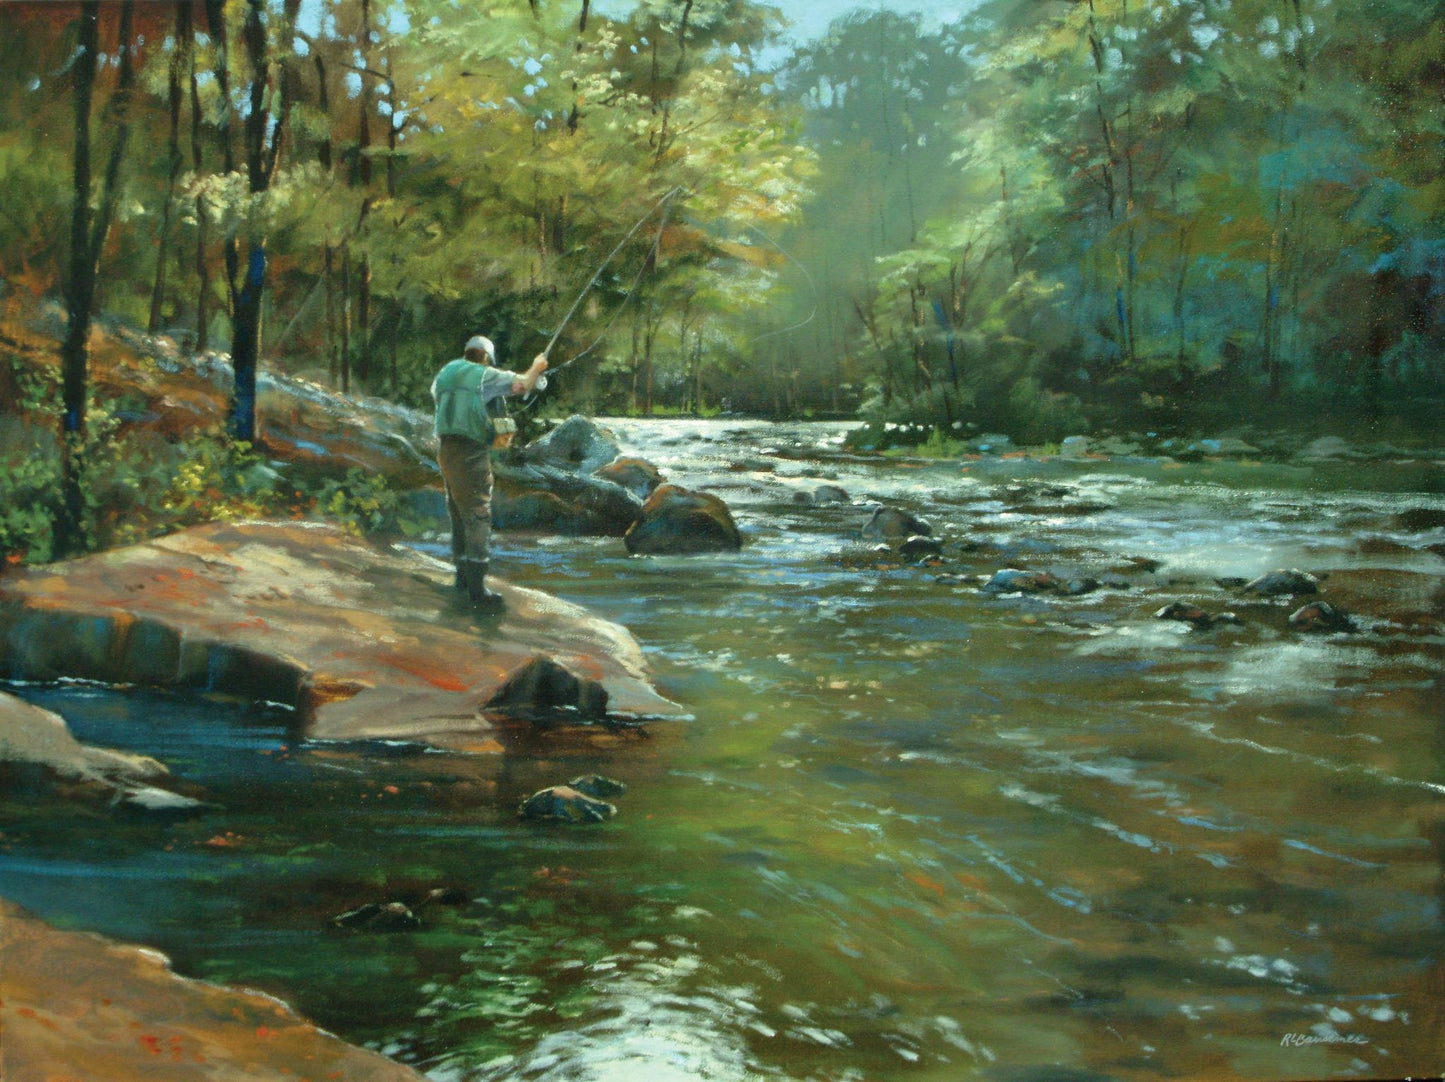 Framed Small - The Fly Fisherman By Roger Bansemer - Green